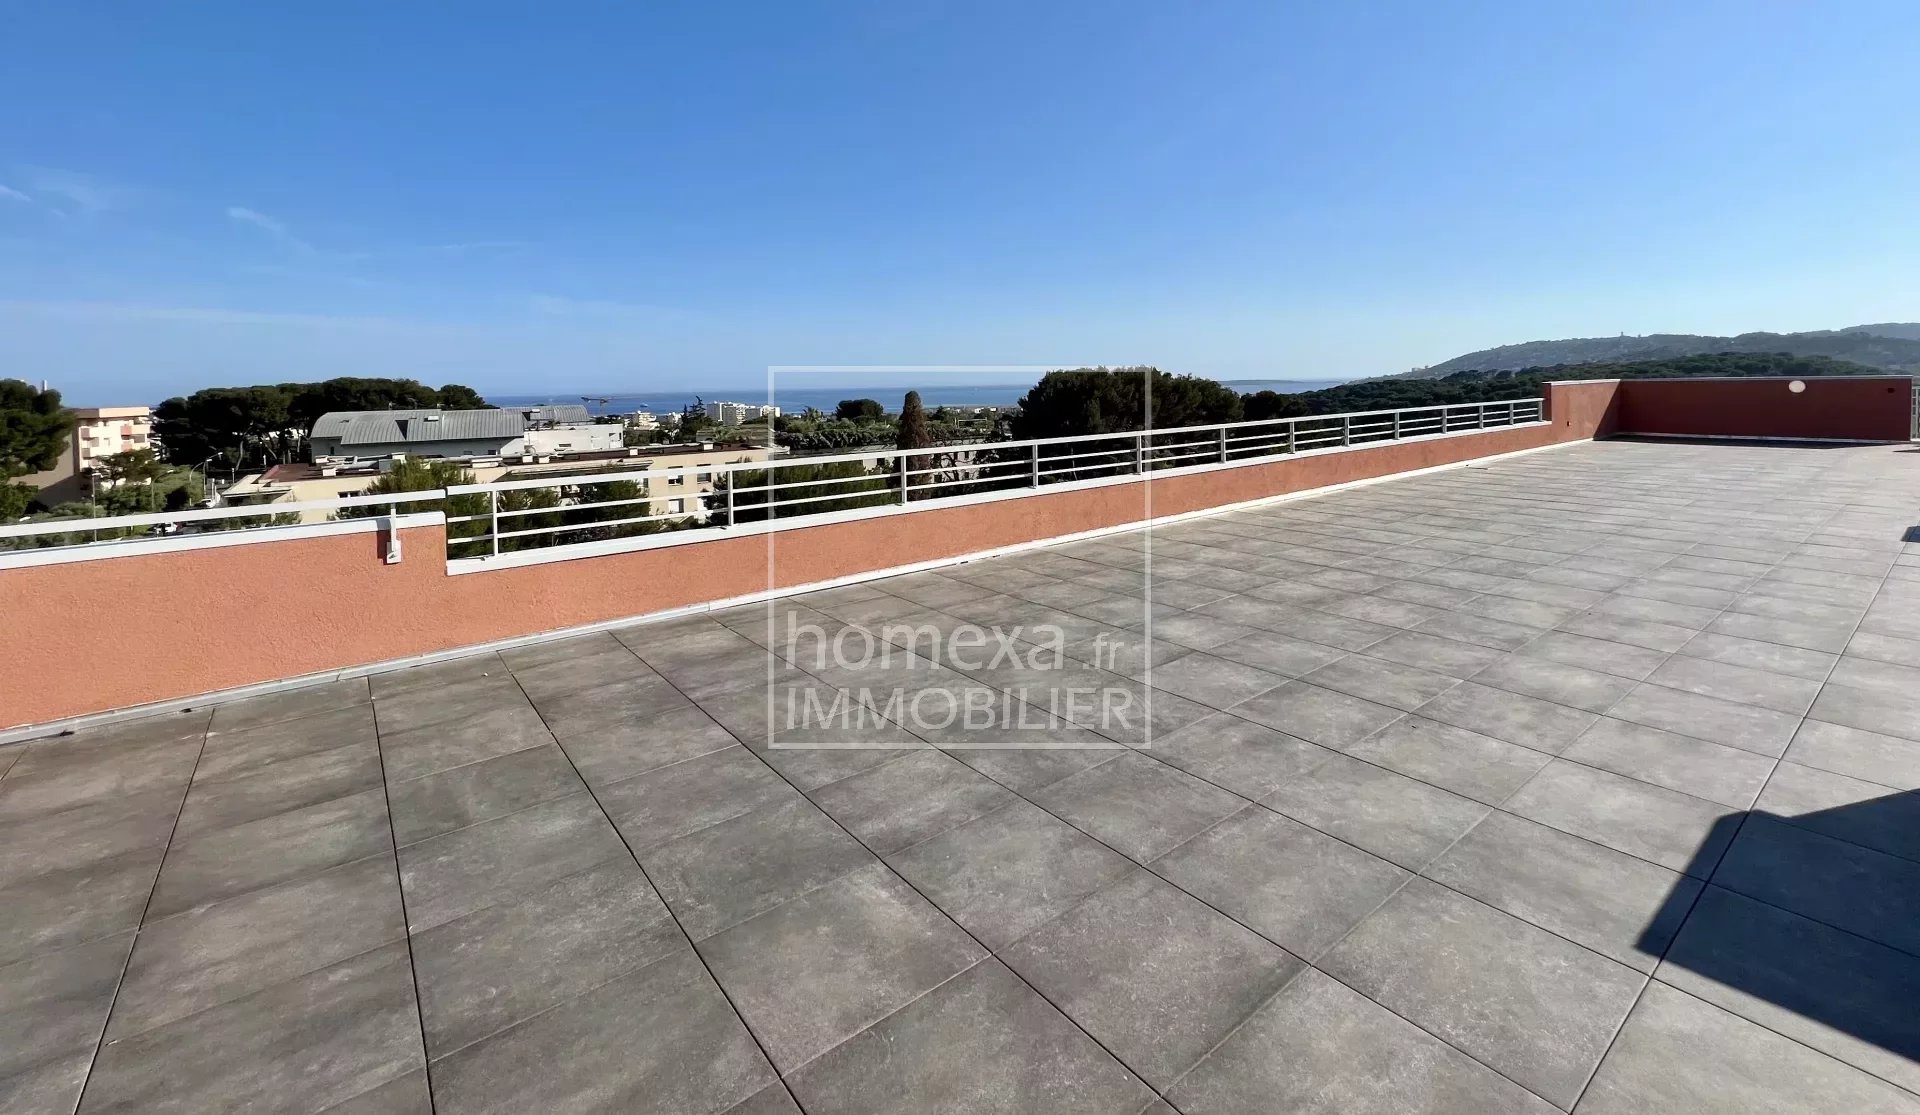 Sea view penthouse for  sale in Antibes